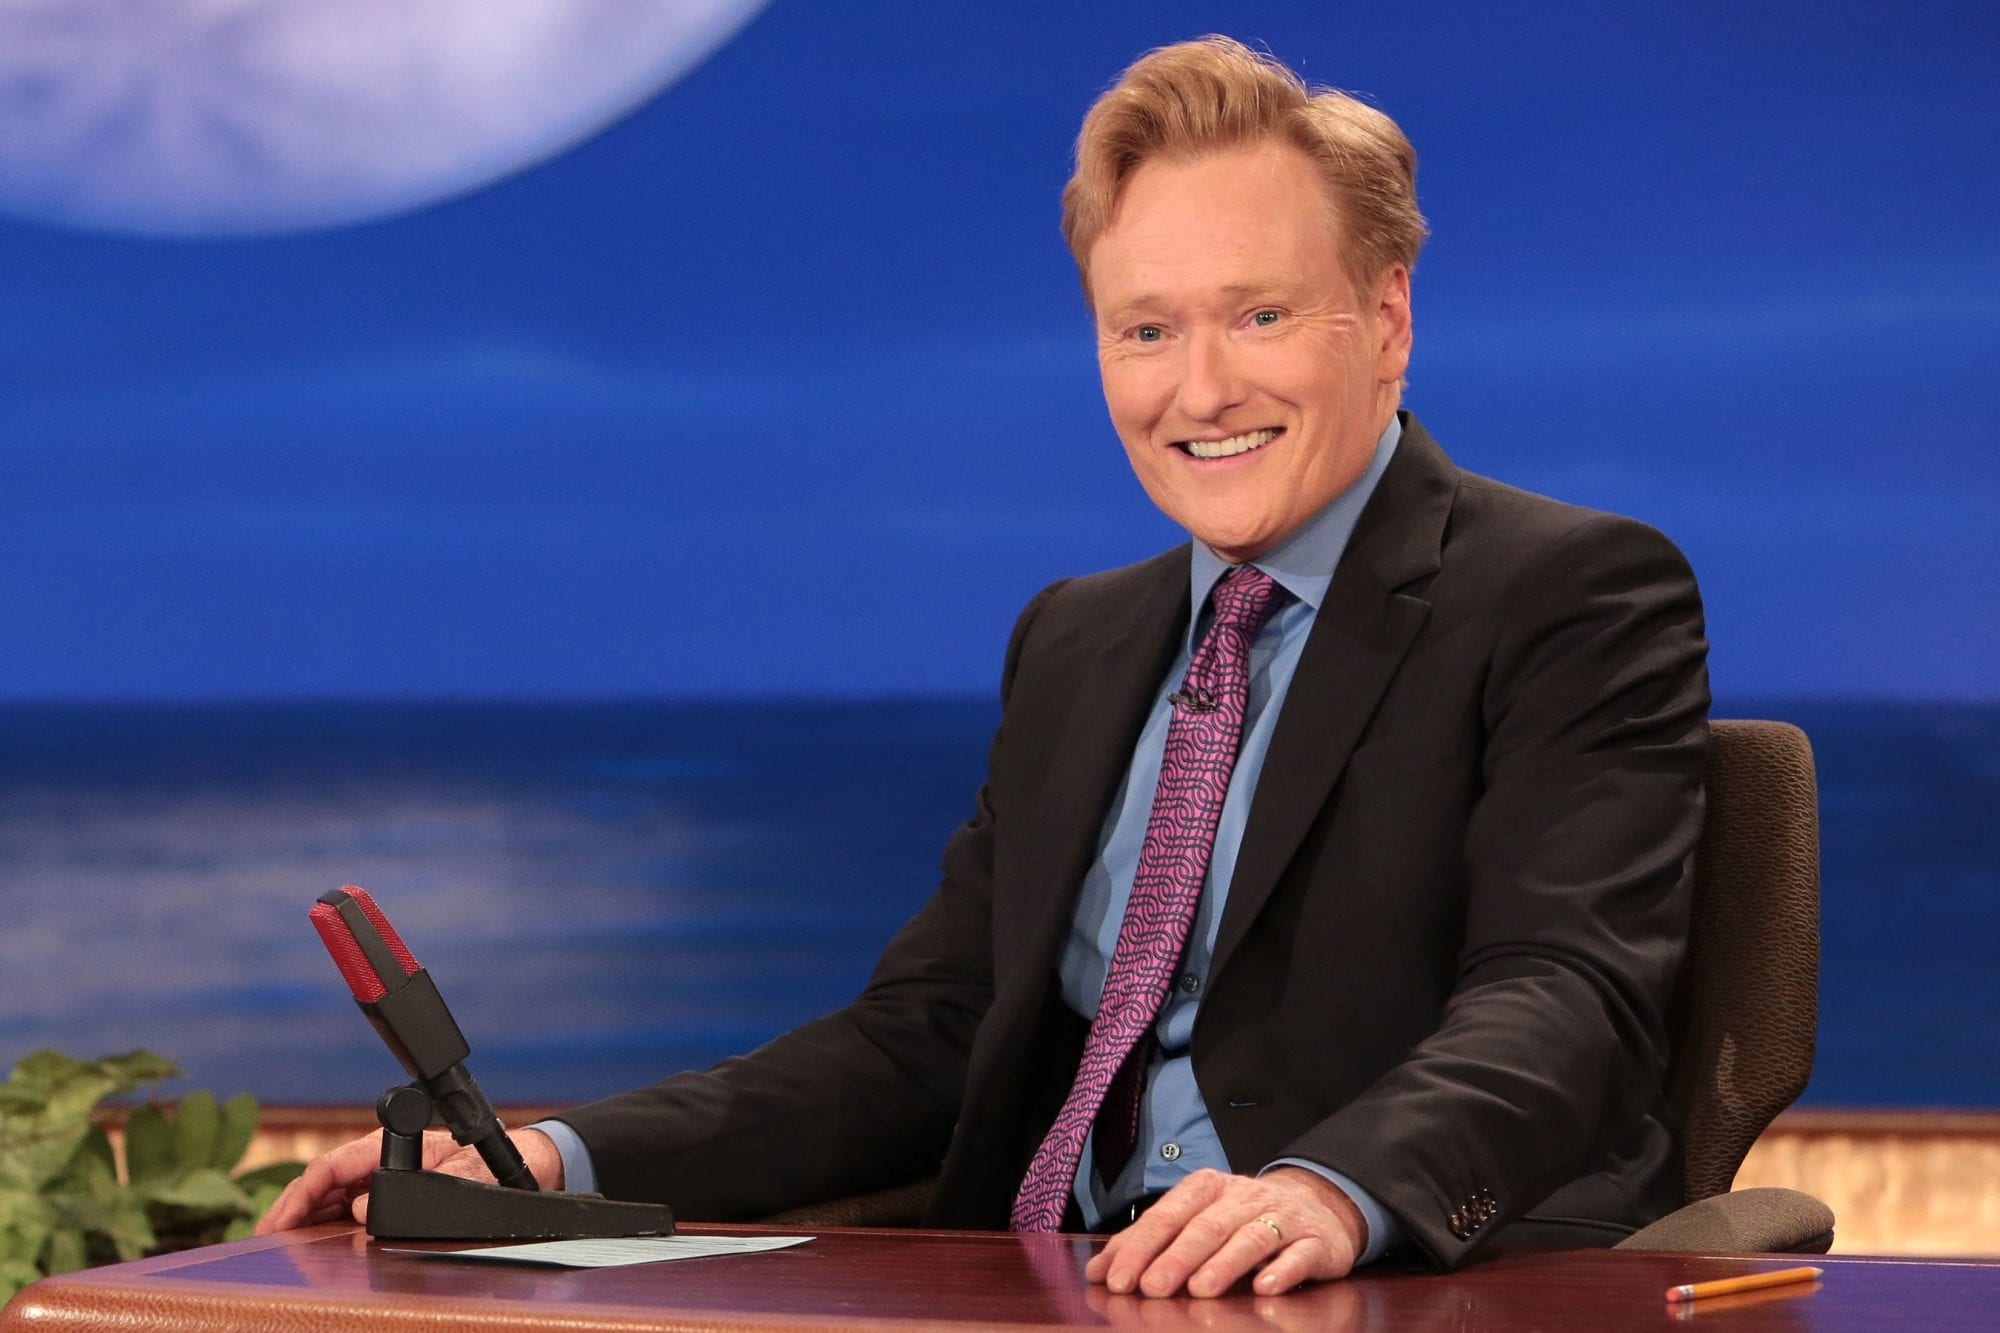 HD desktop wallpaper featuring a smiling talk show host at his desk with a moon backdrop, ideal for Conan fans.